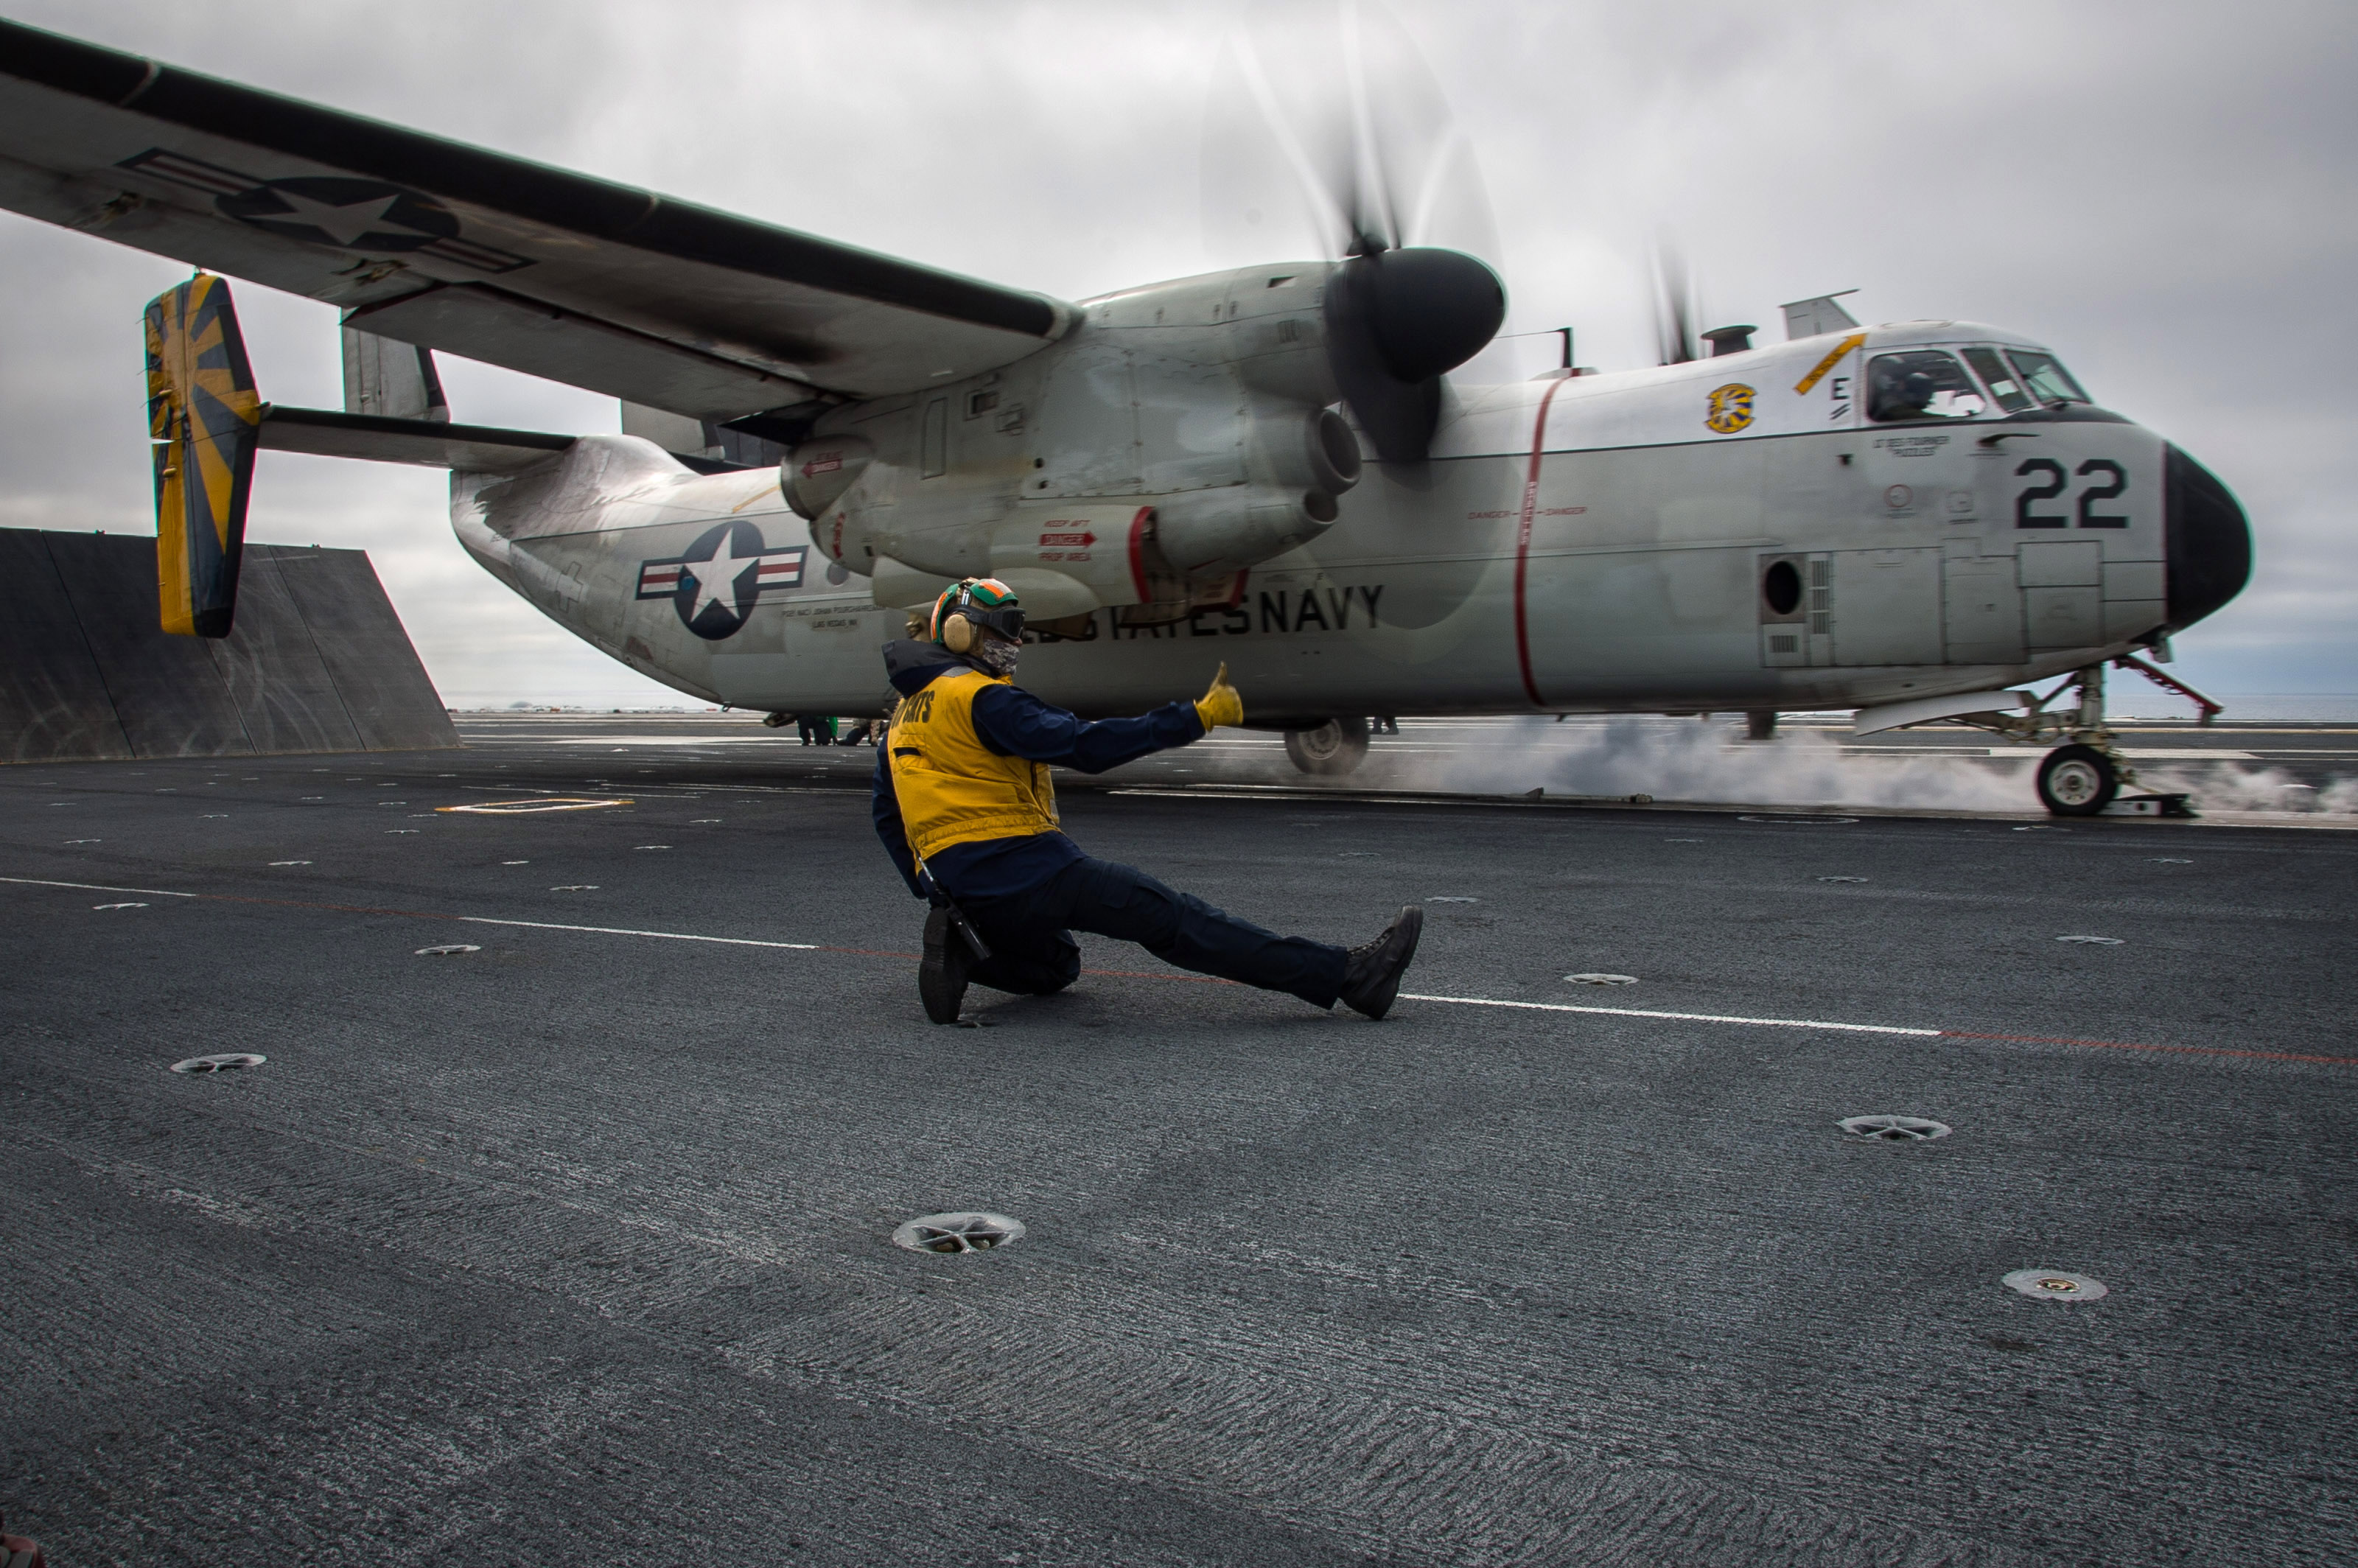 In this U.S. Navy handout, Aviation Boatswain's Mate (Equipment) 2nd Class Chad Cole signals for a C-2A Greyhound logistics aircraft assigned to the "Providers" of Fleet Logistics Support Squadron (VRC) 30 to take off from the flight deck of the USS Theodore Roosevelt (CVN 71) on February 10, 2017 in the Pacific Ocean. (Mass Communication Specialist Seaman Alex Corona/U.S. Navy via Getty Images)